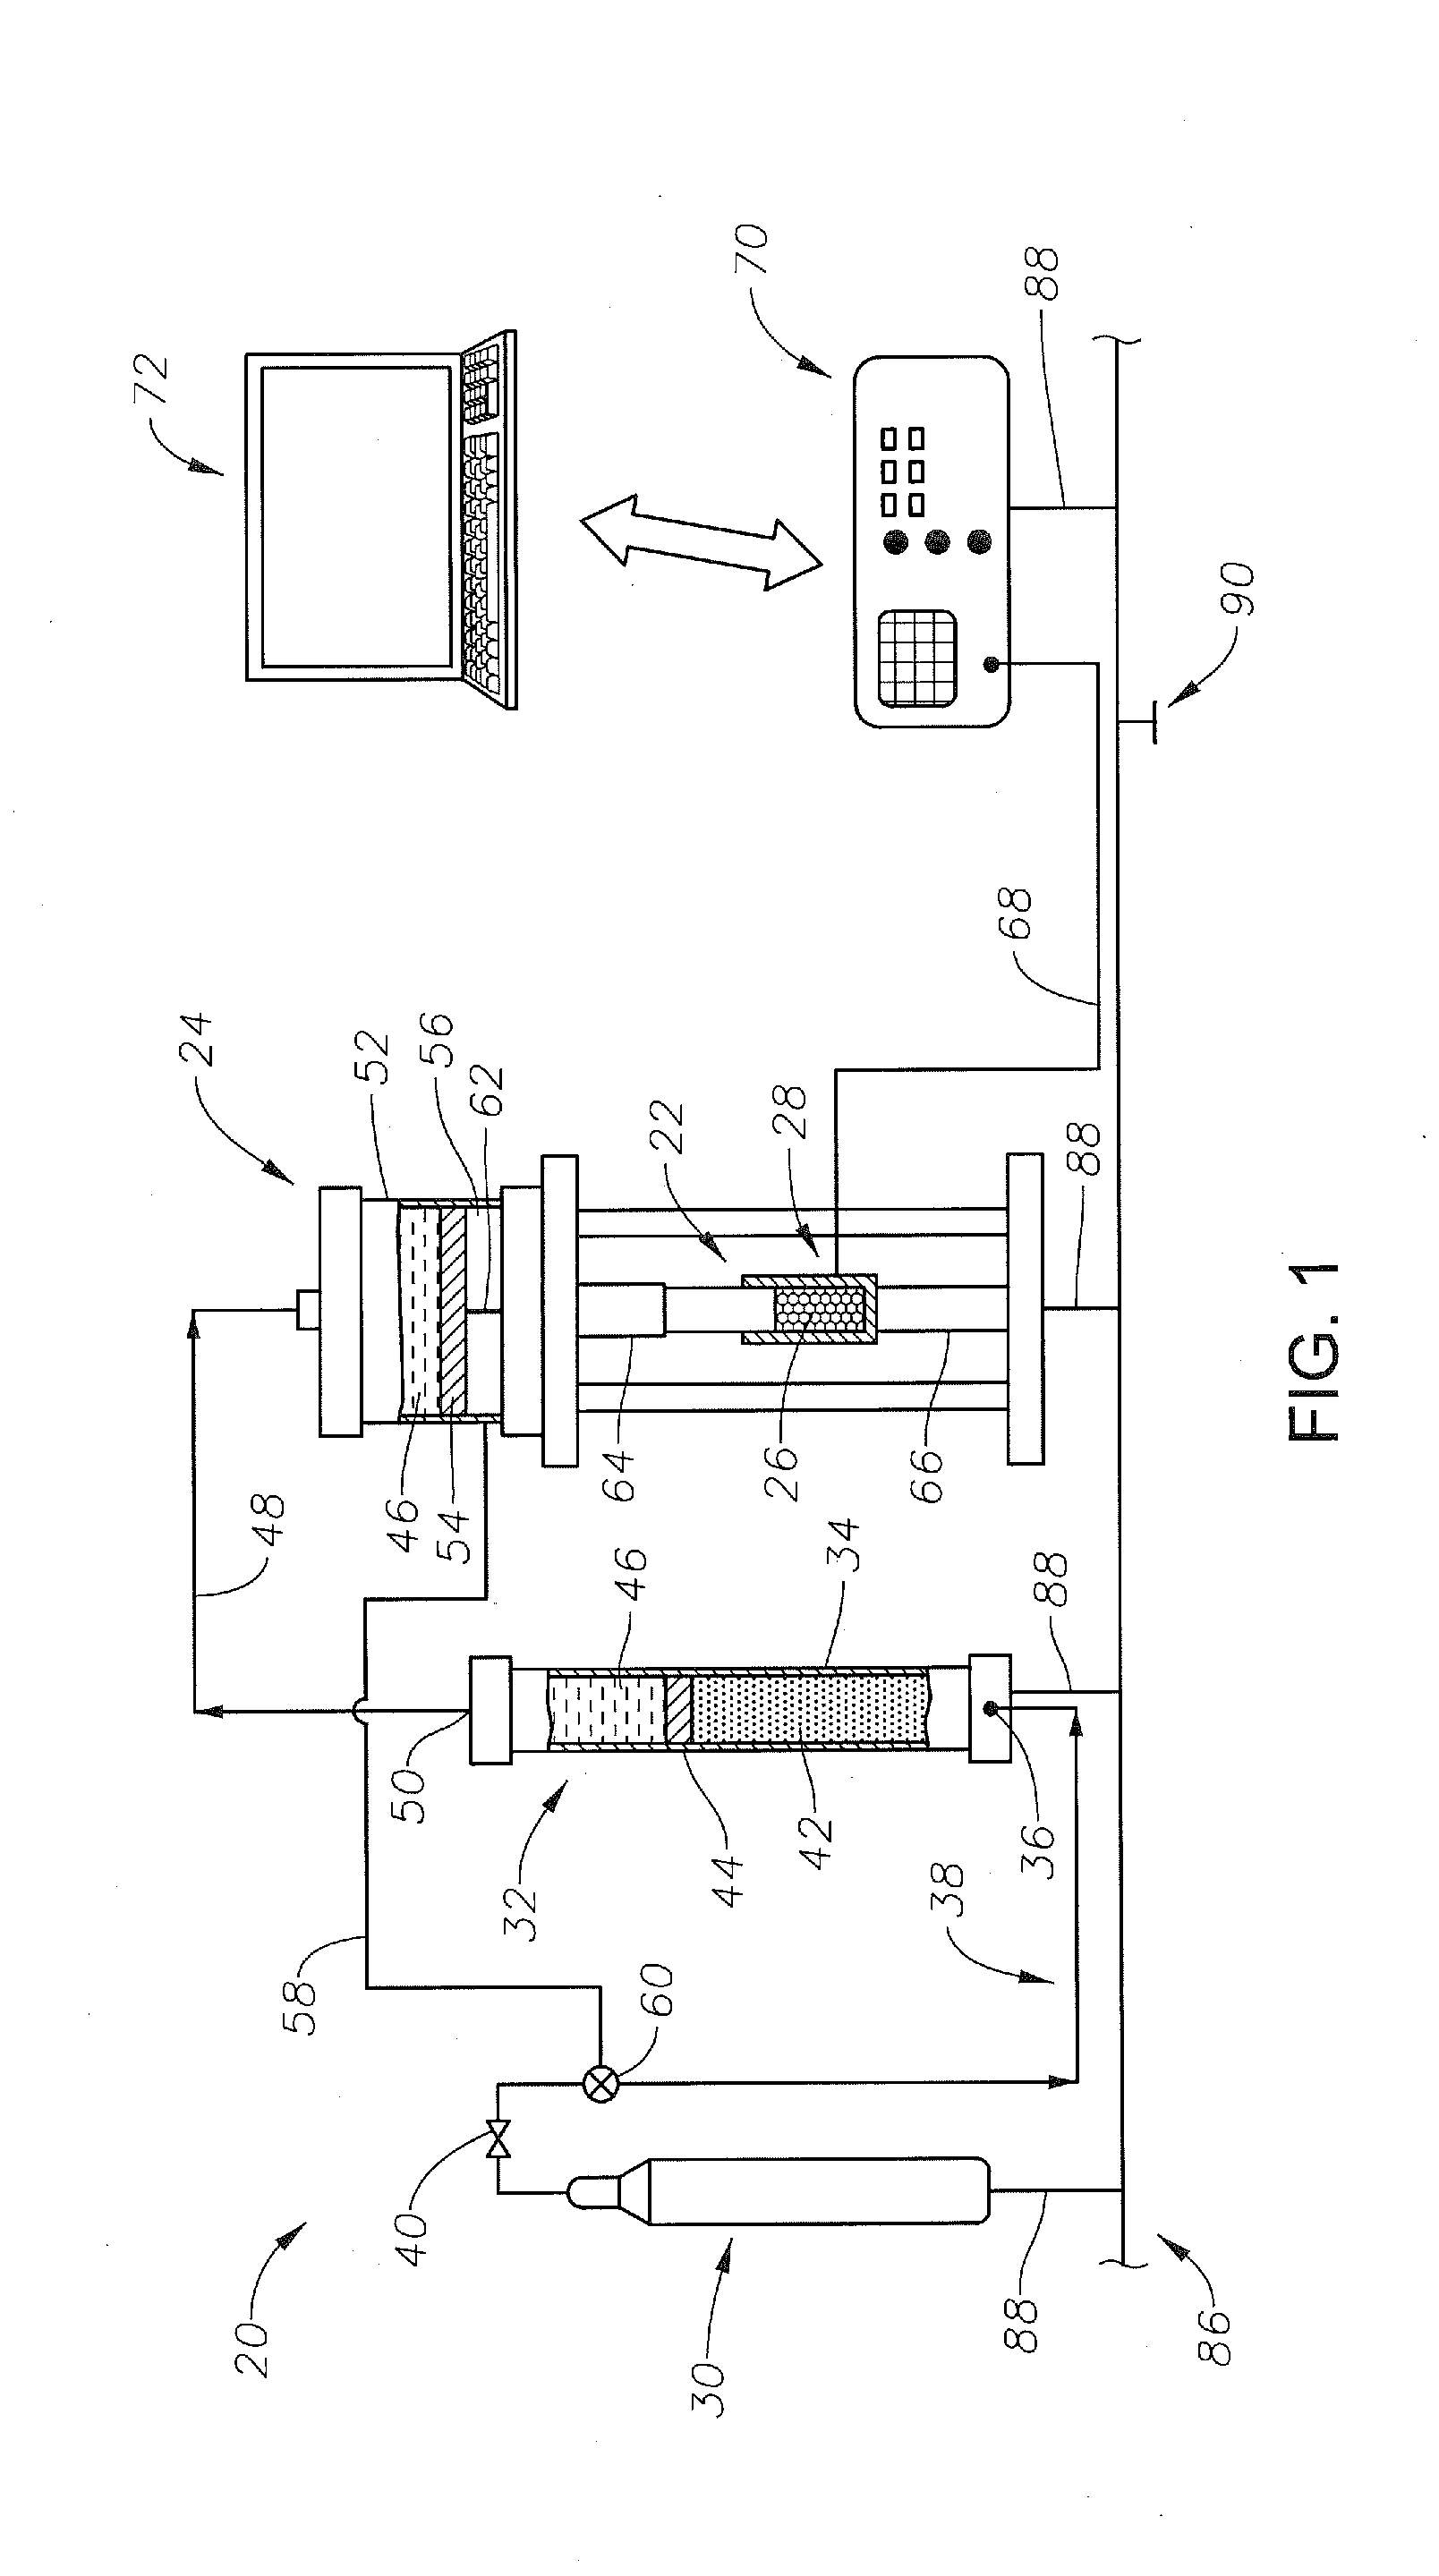 Portable device and method for field testing proppant